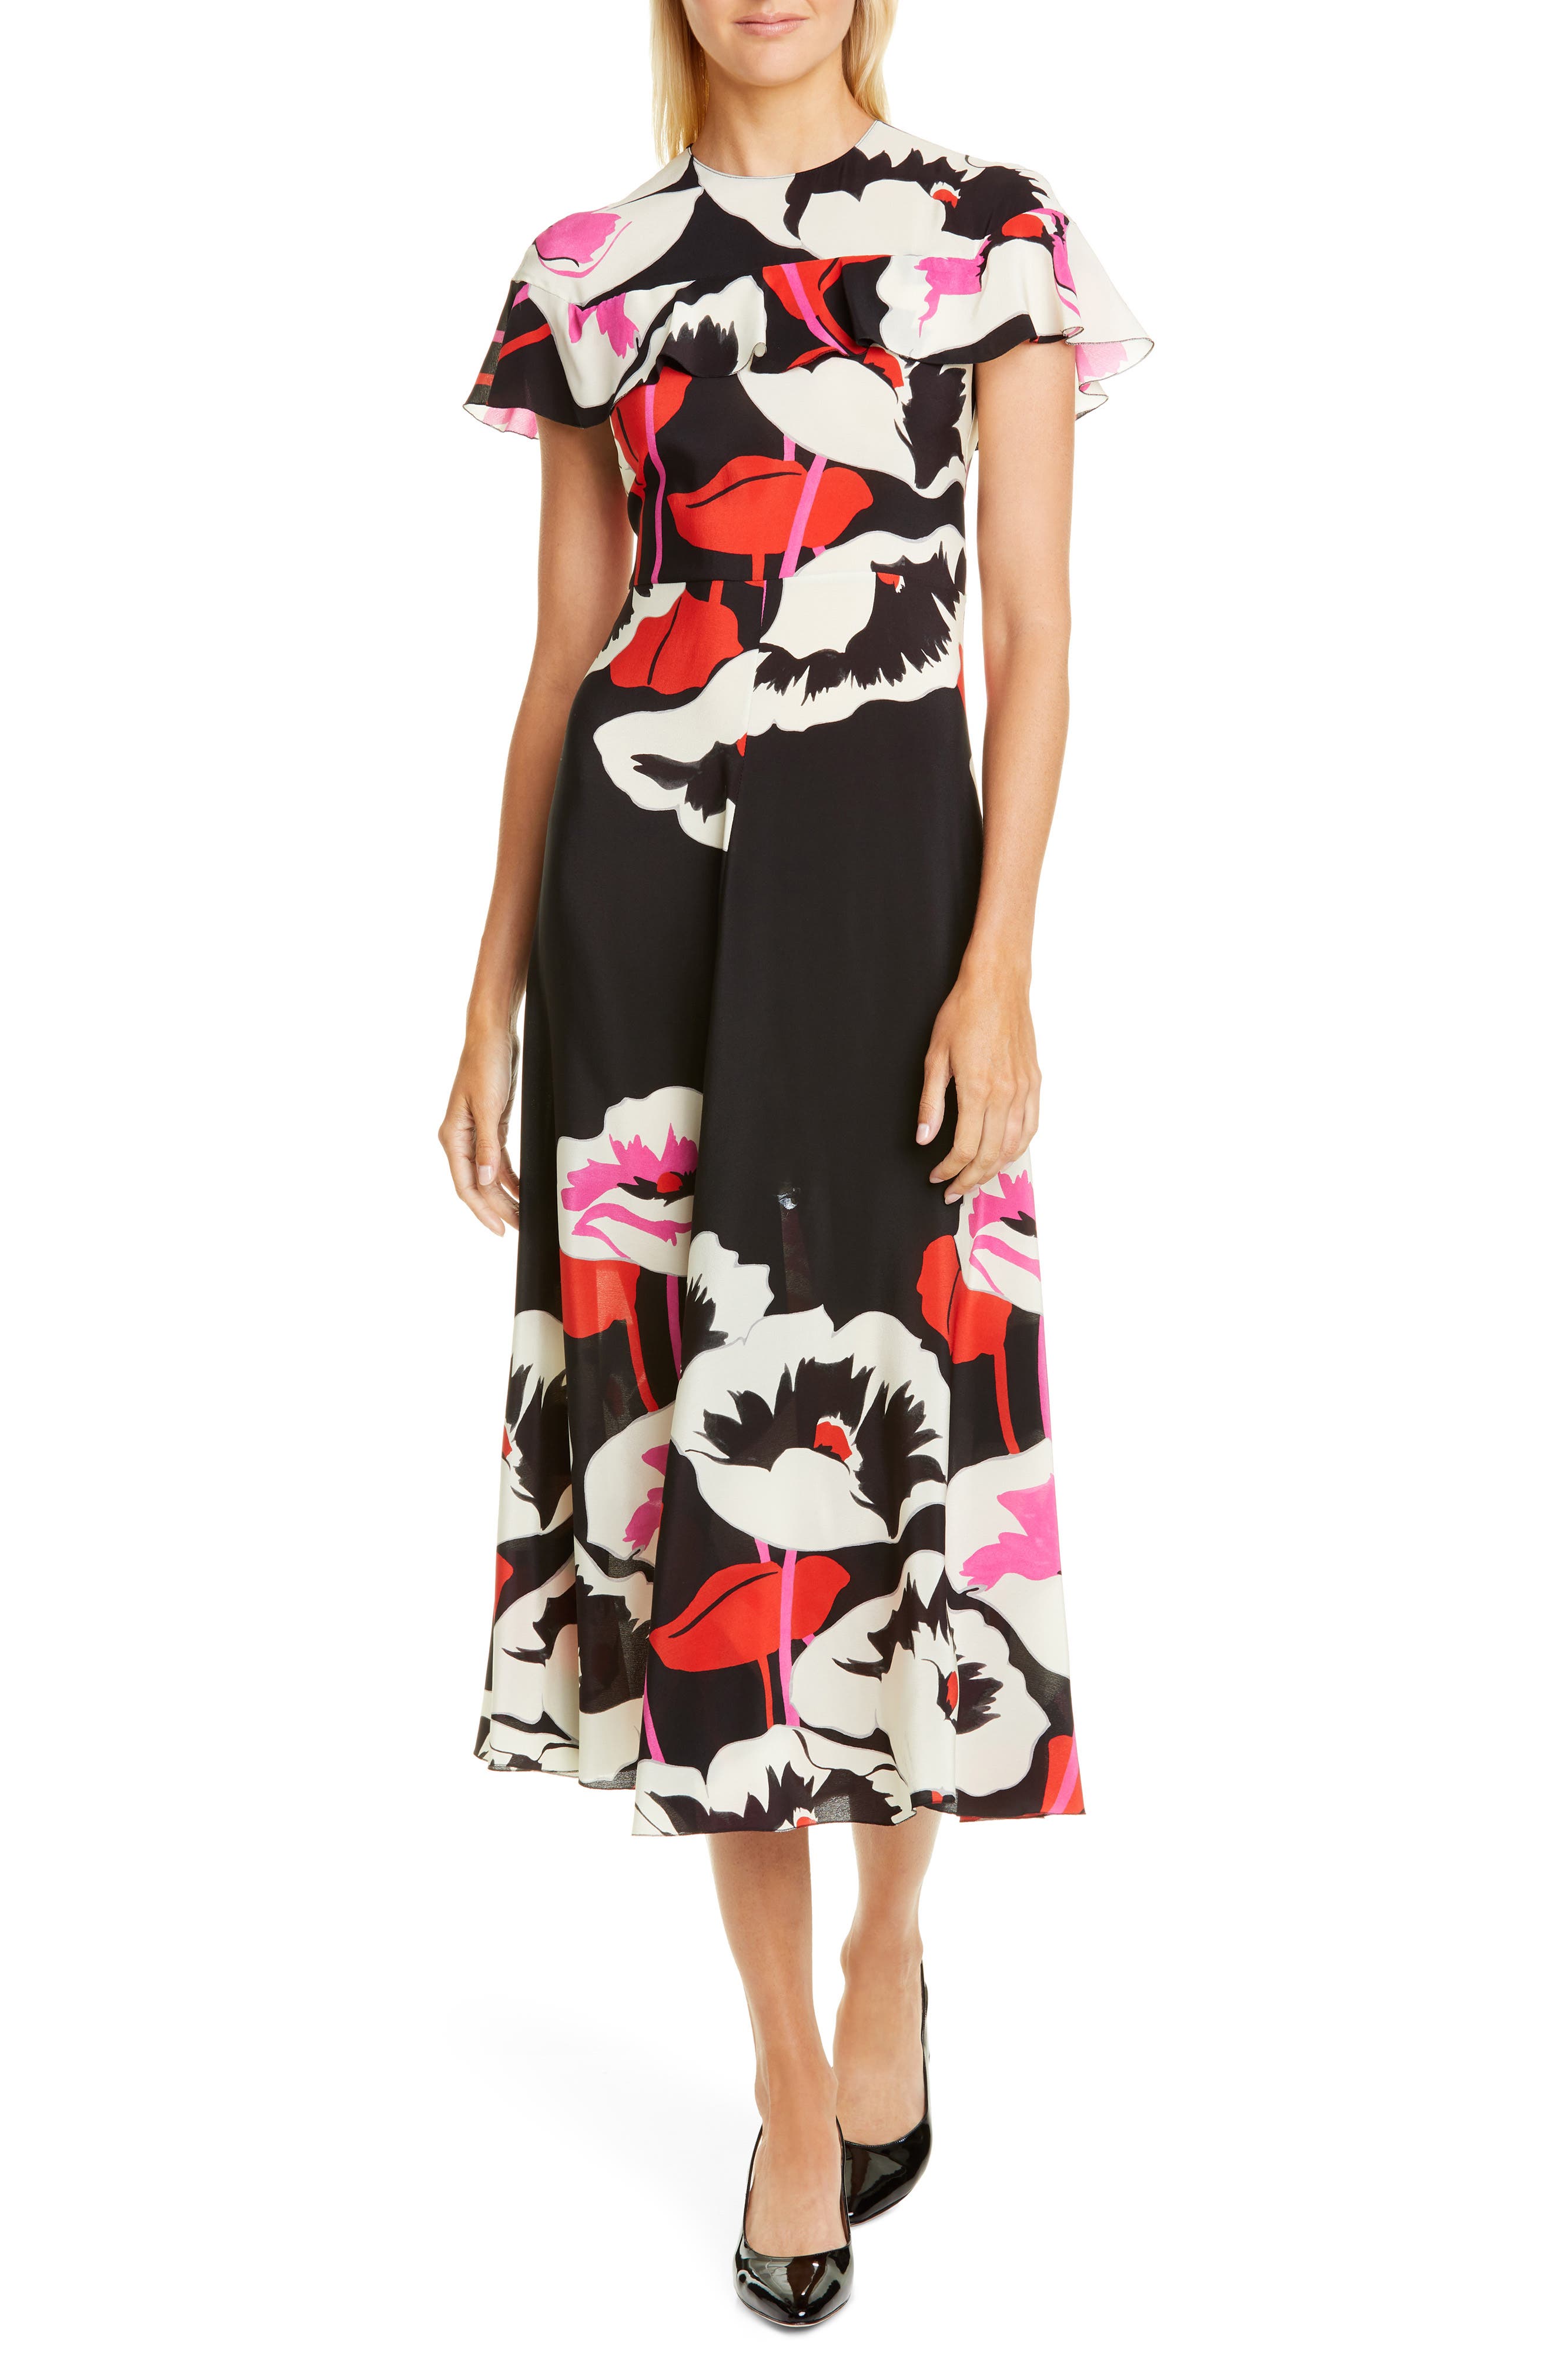 Red Valentino Floral Dress Store, 53% OFF | www.emanagreen.com